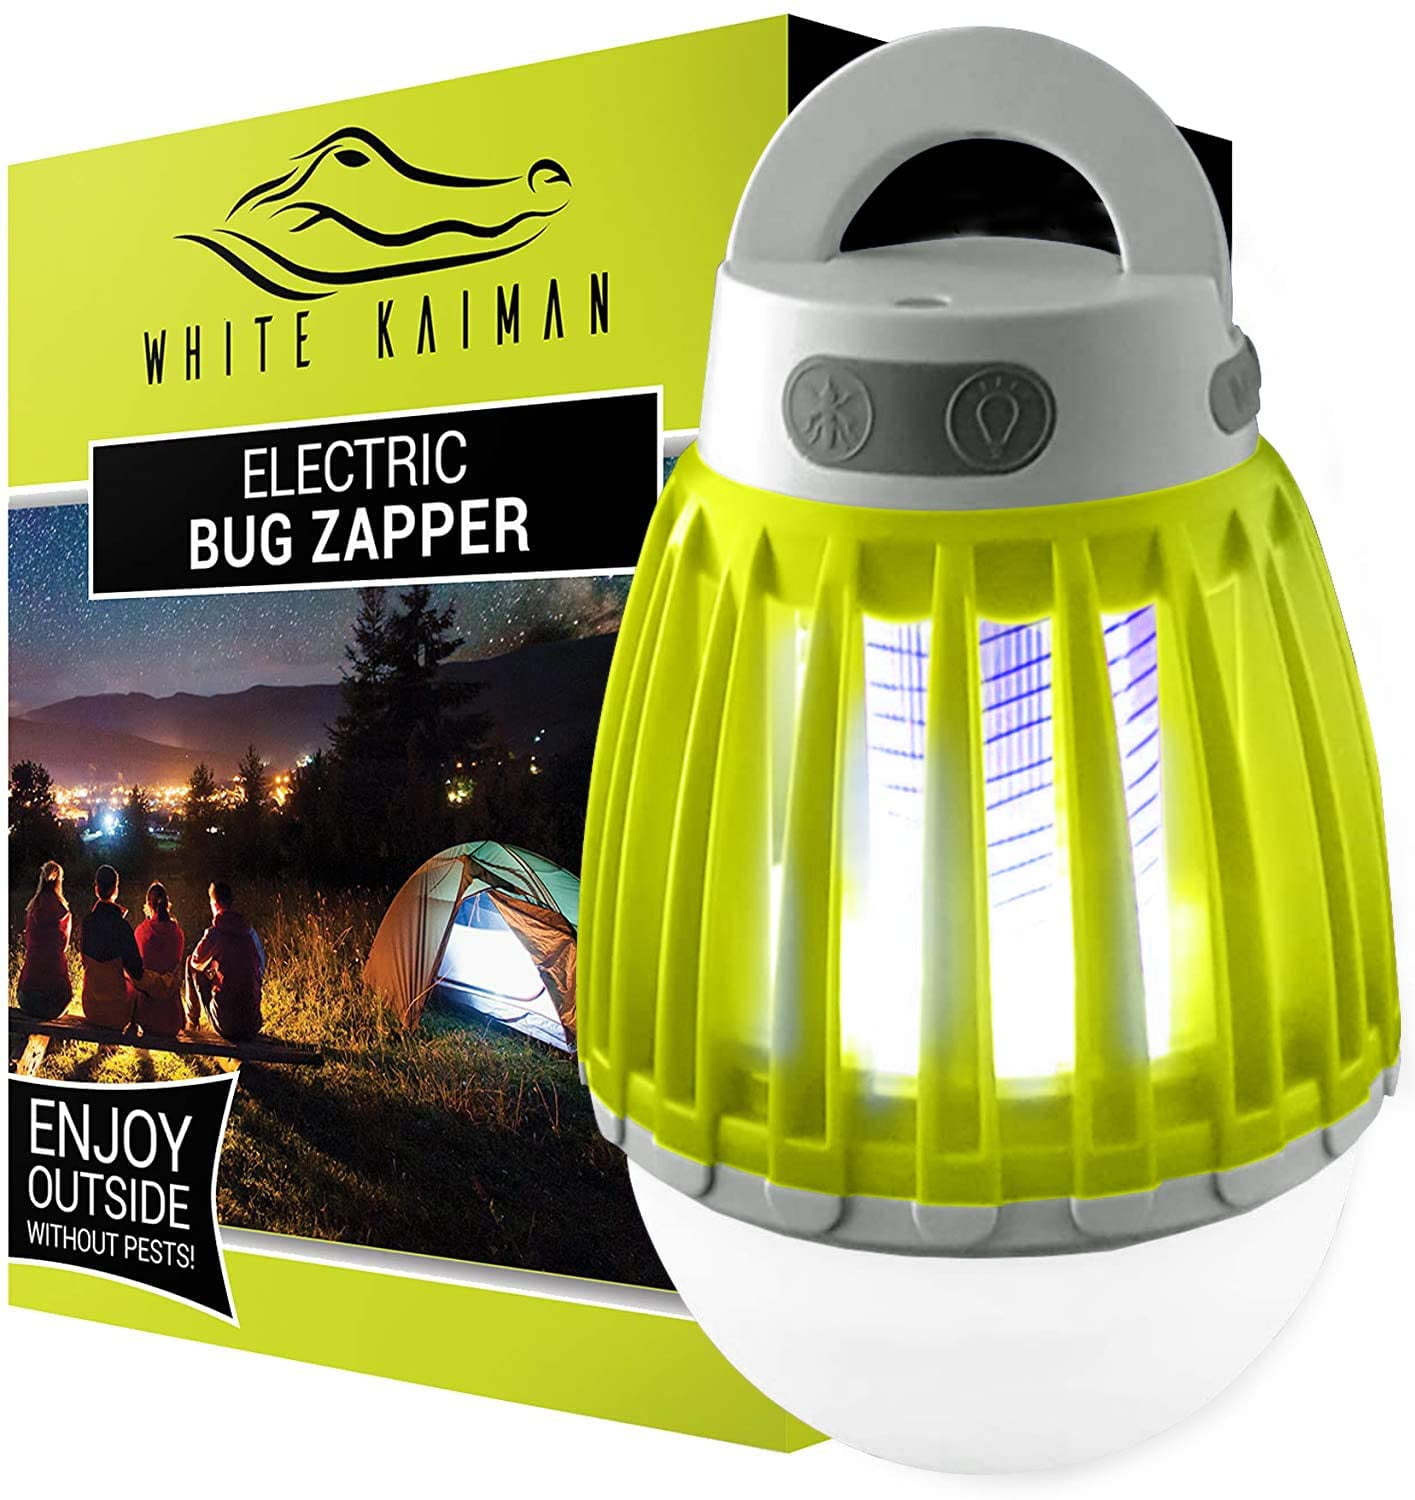 Rechargeable Waterproof Mosquito Killer Light Bulb for Indoors & Outdoors Orange White Kaiman 2 in 1 Bug Zapper Outdoor 